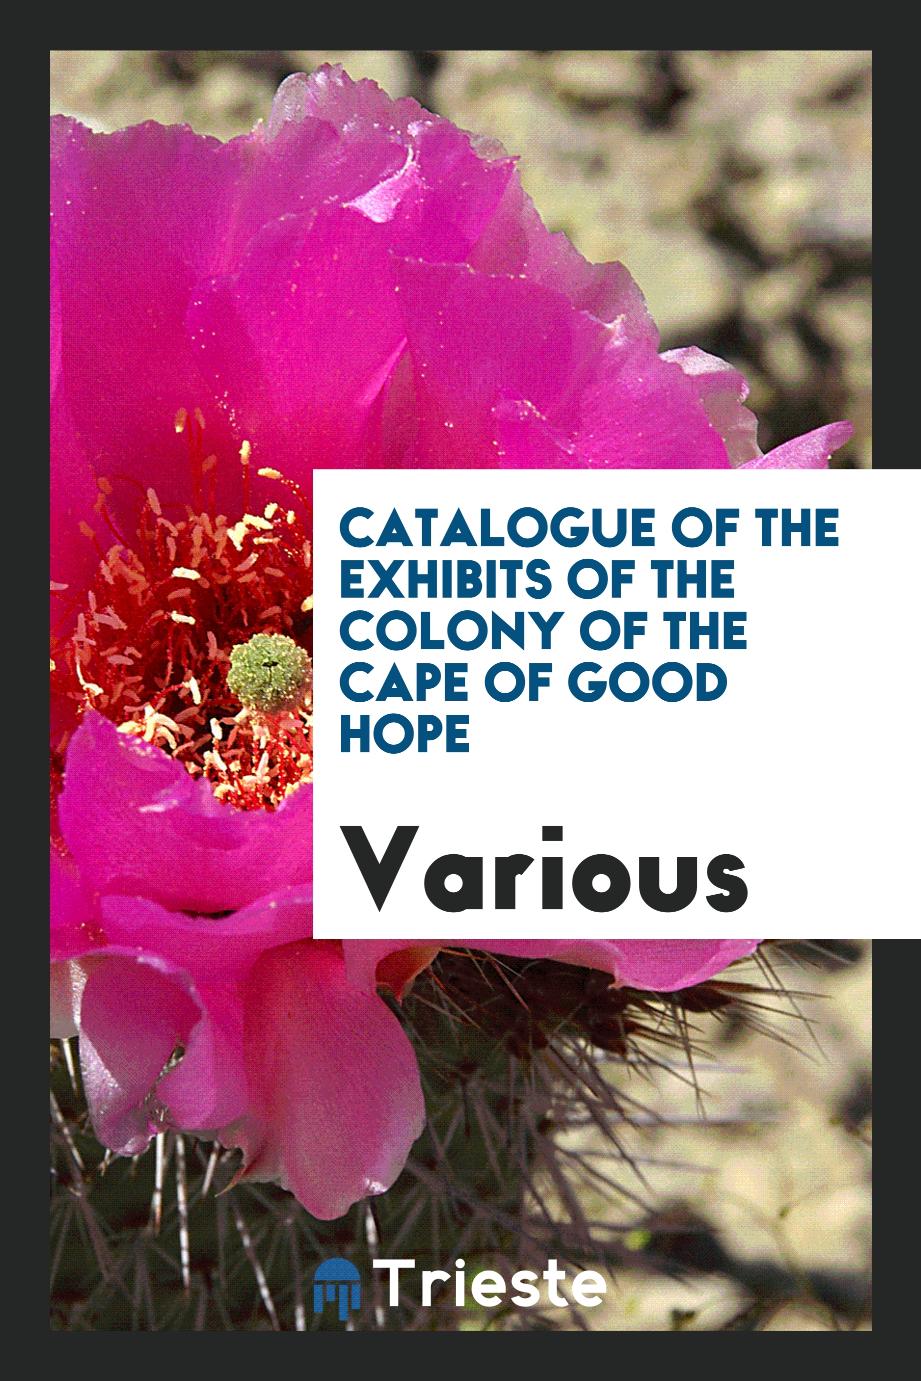 Catalogue of the Exhibits of the Colony of the Cape of Good Hope